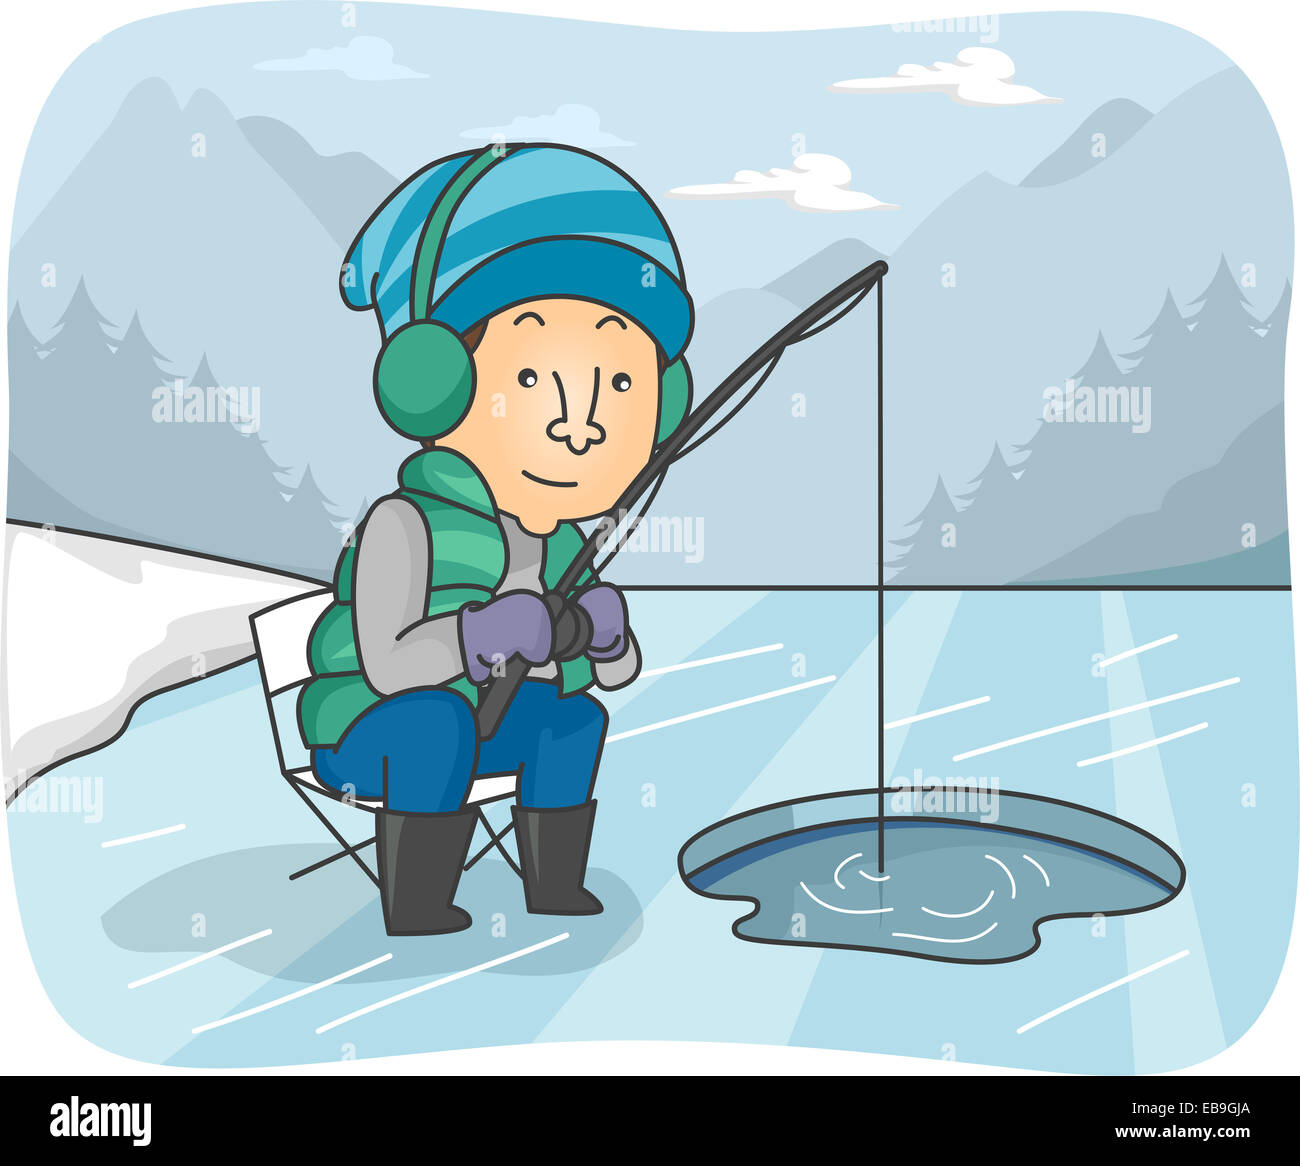 Illustration of a Man Fishing in a Frozen River Stock Photo